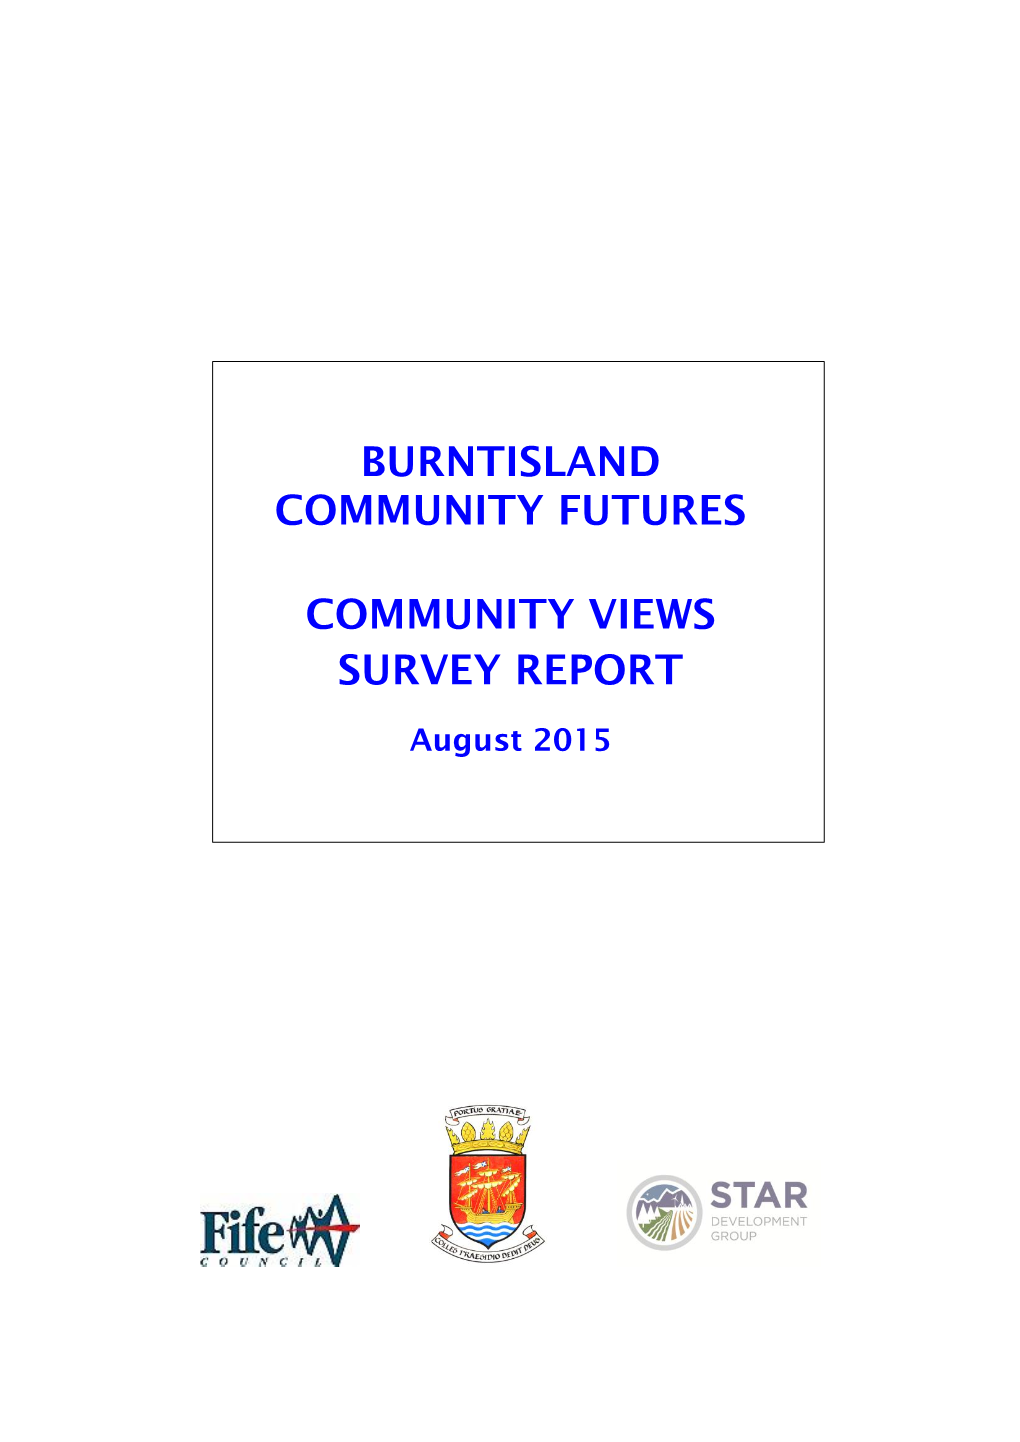 Community Survey Conducted As Part of the Community Engagement and Stakeholder Consultation Undertaken Between June and August 2015